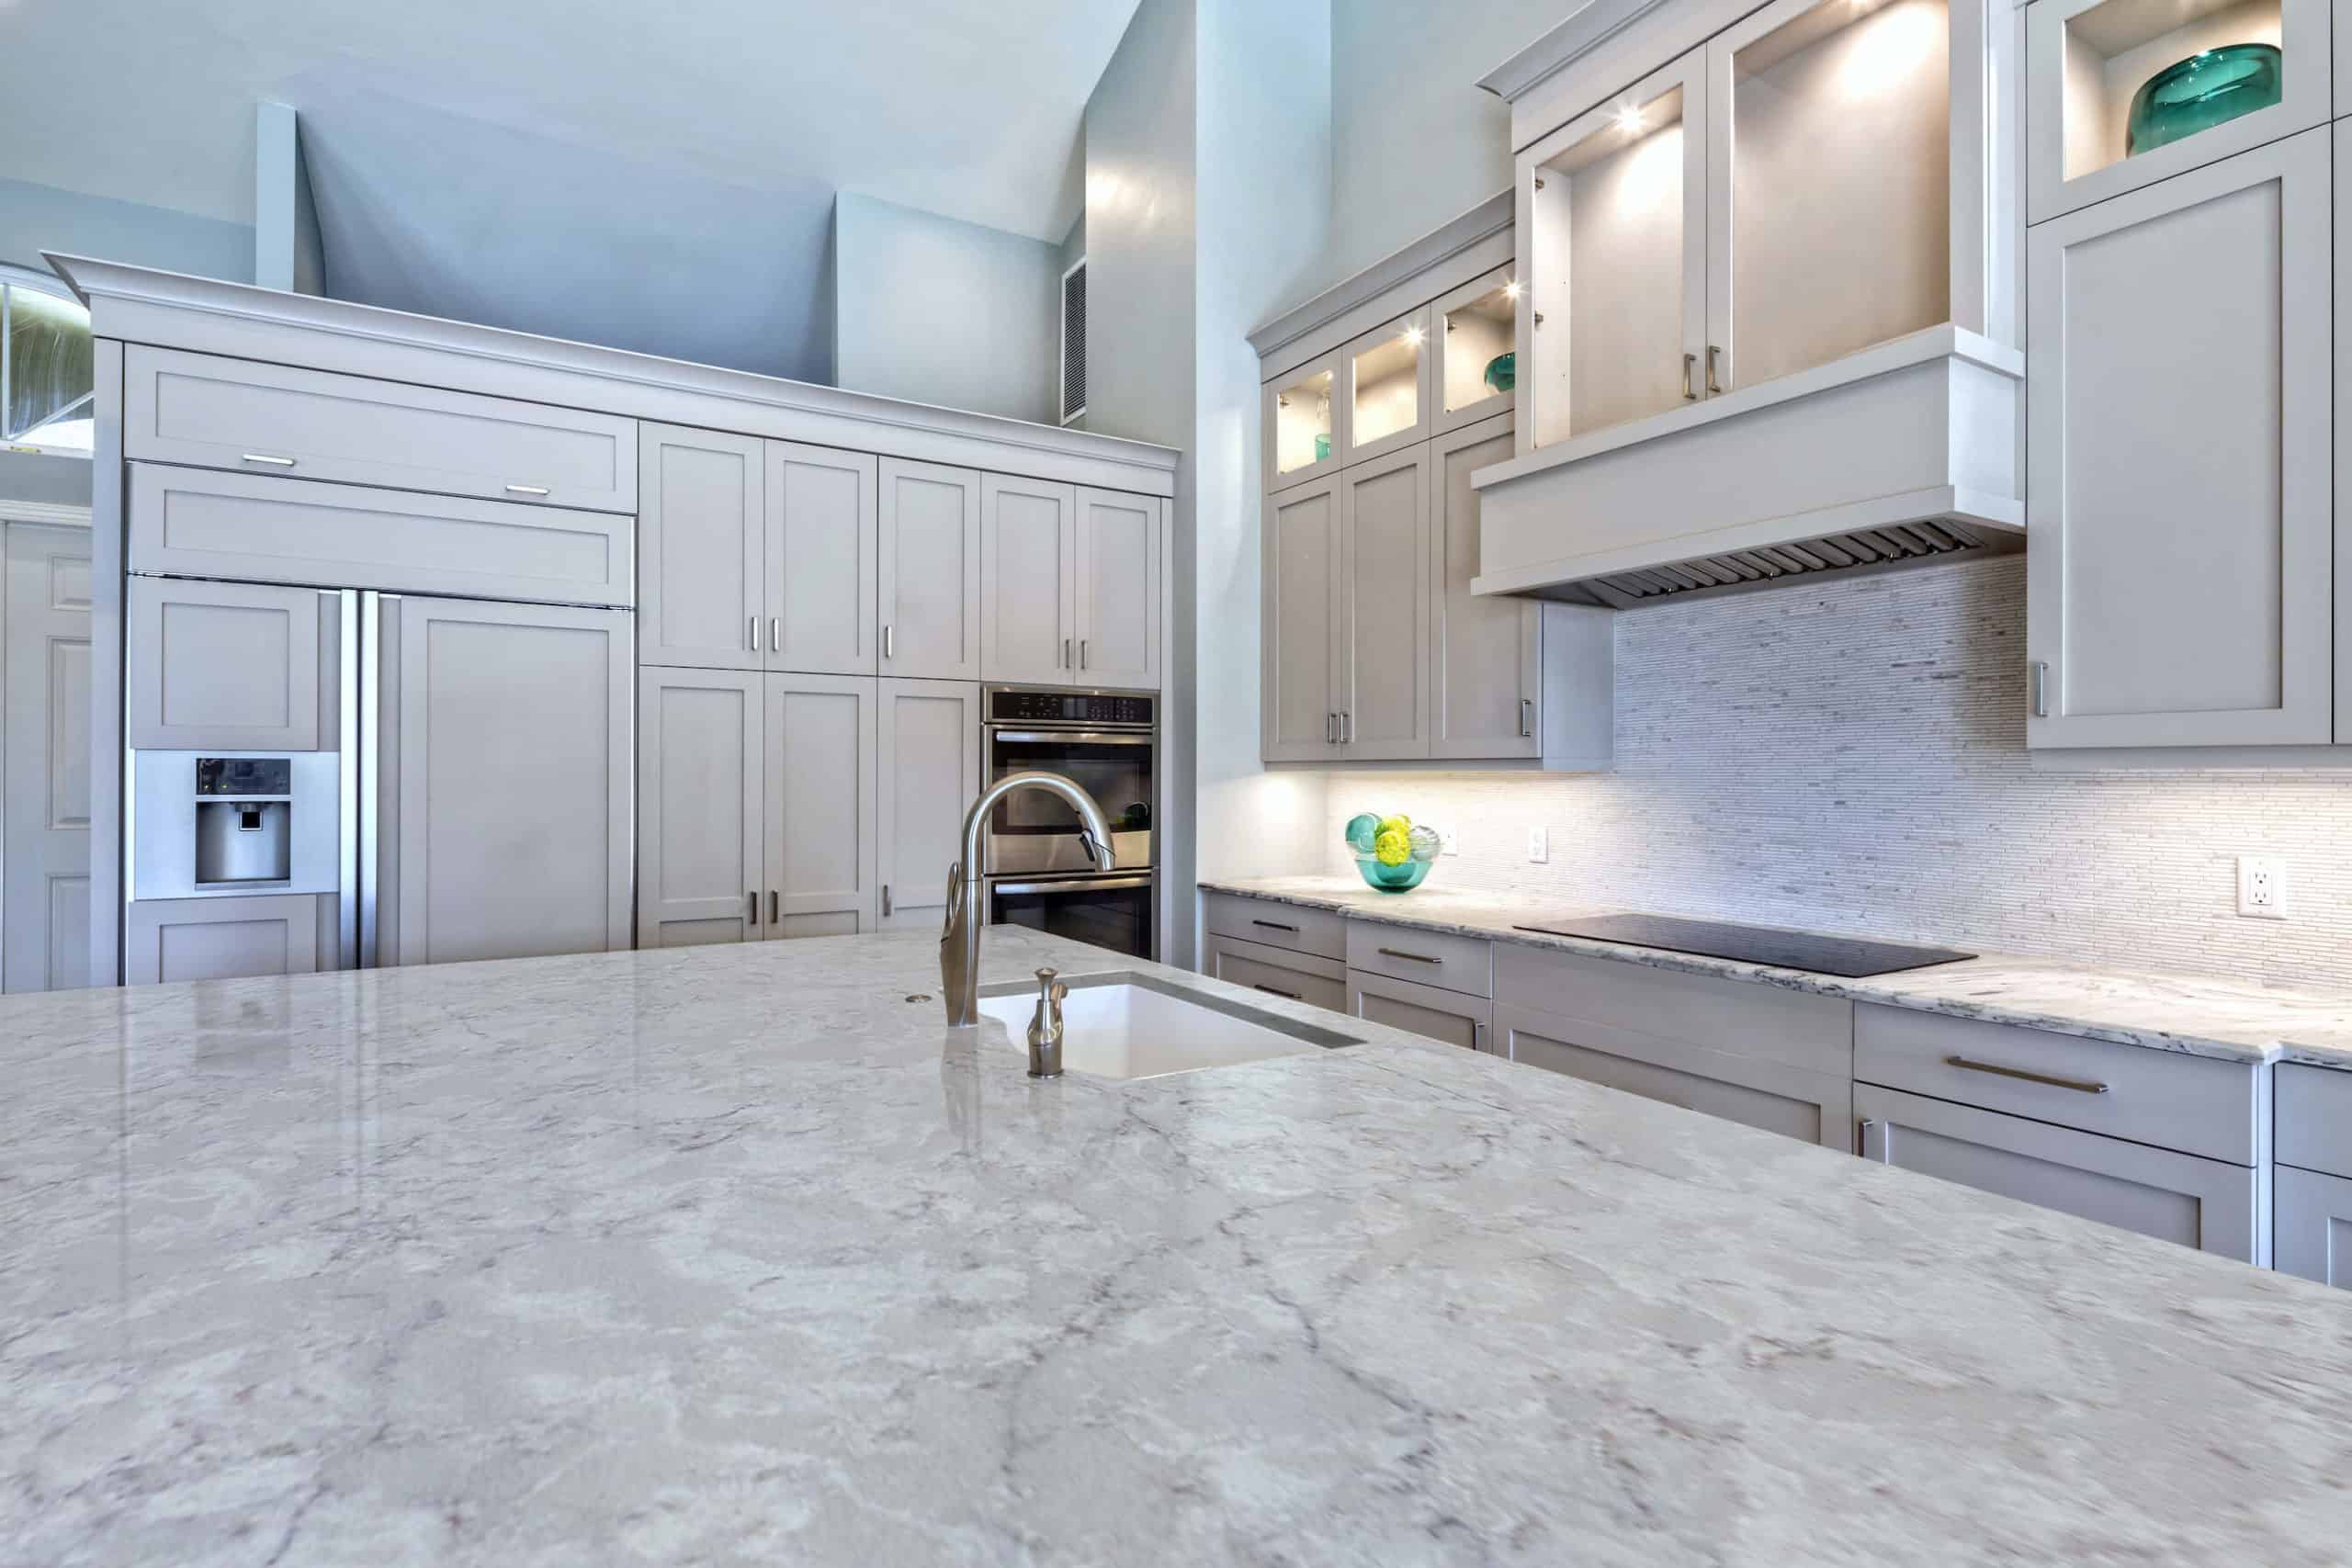 How To Clean Quartz Kitchen And, Cleaning Granite Bathroom Countertops